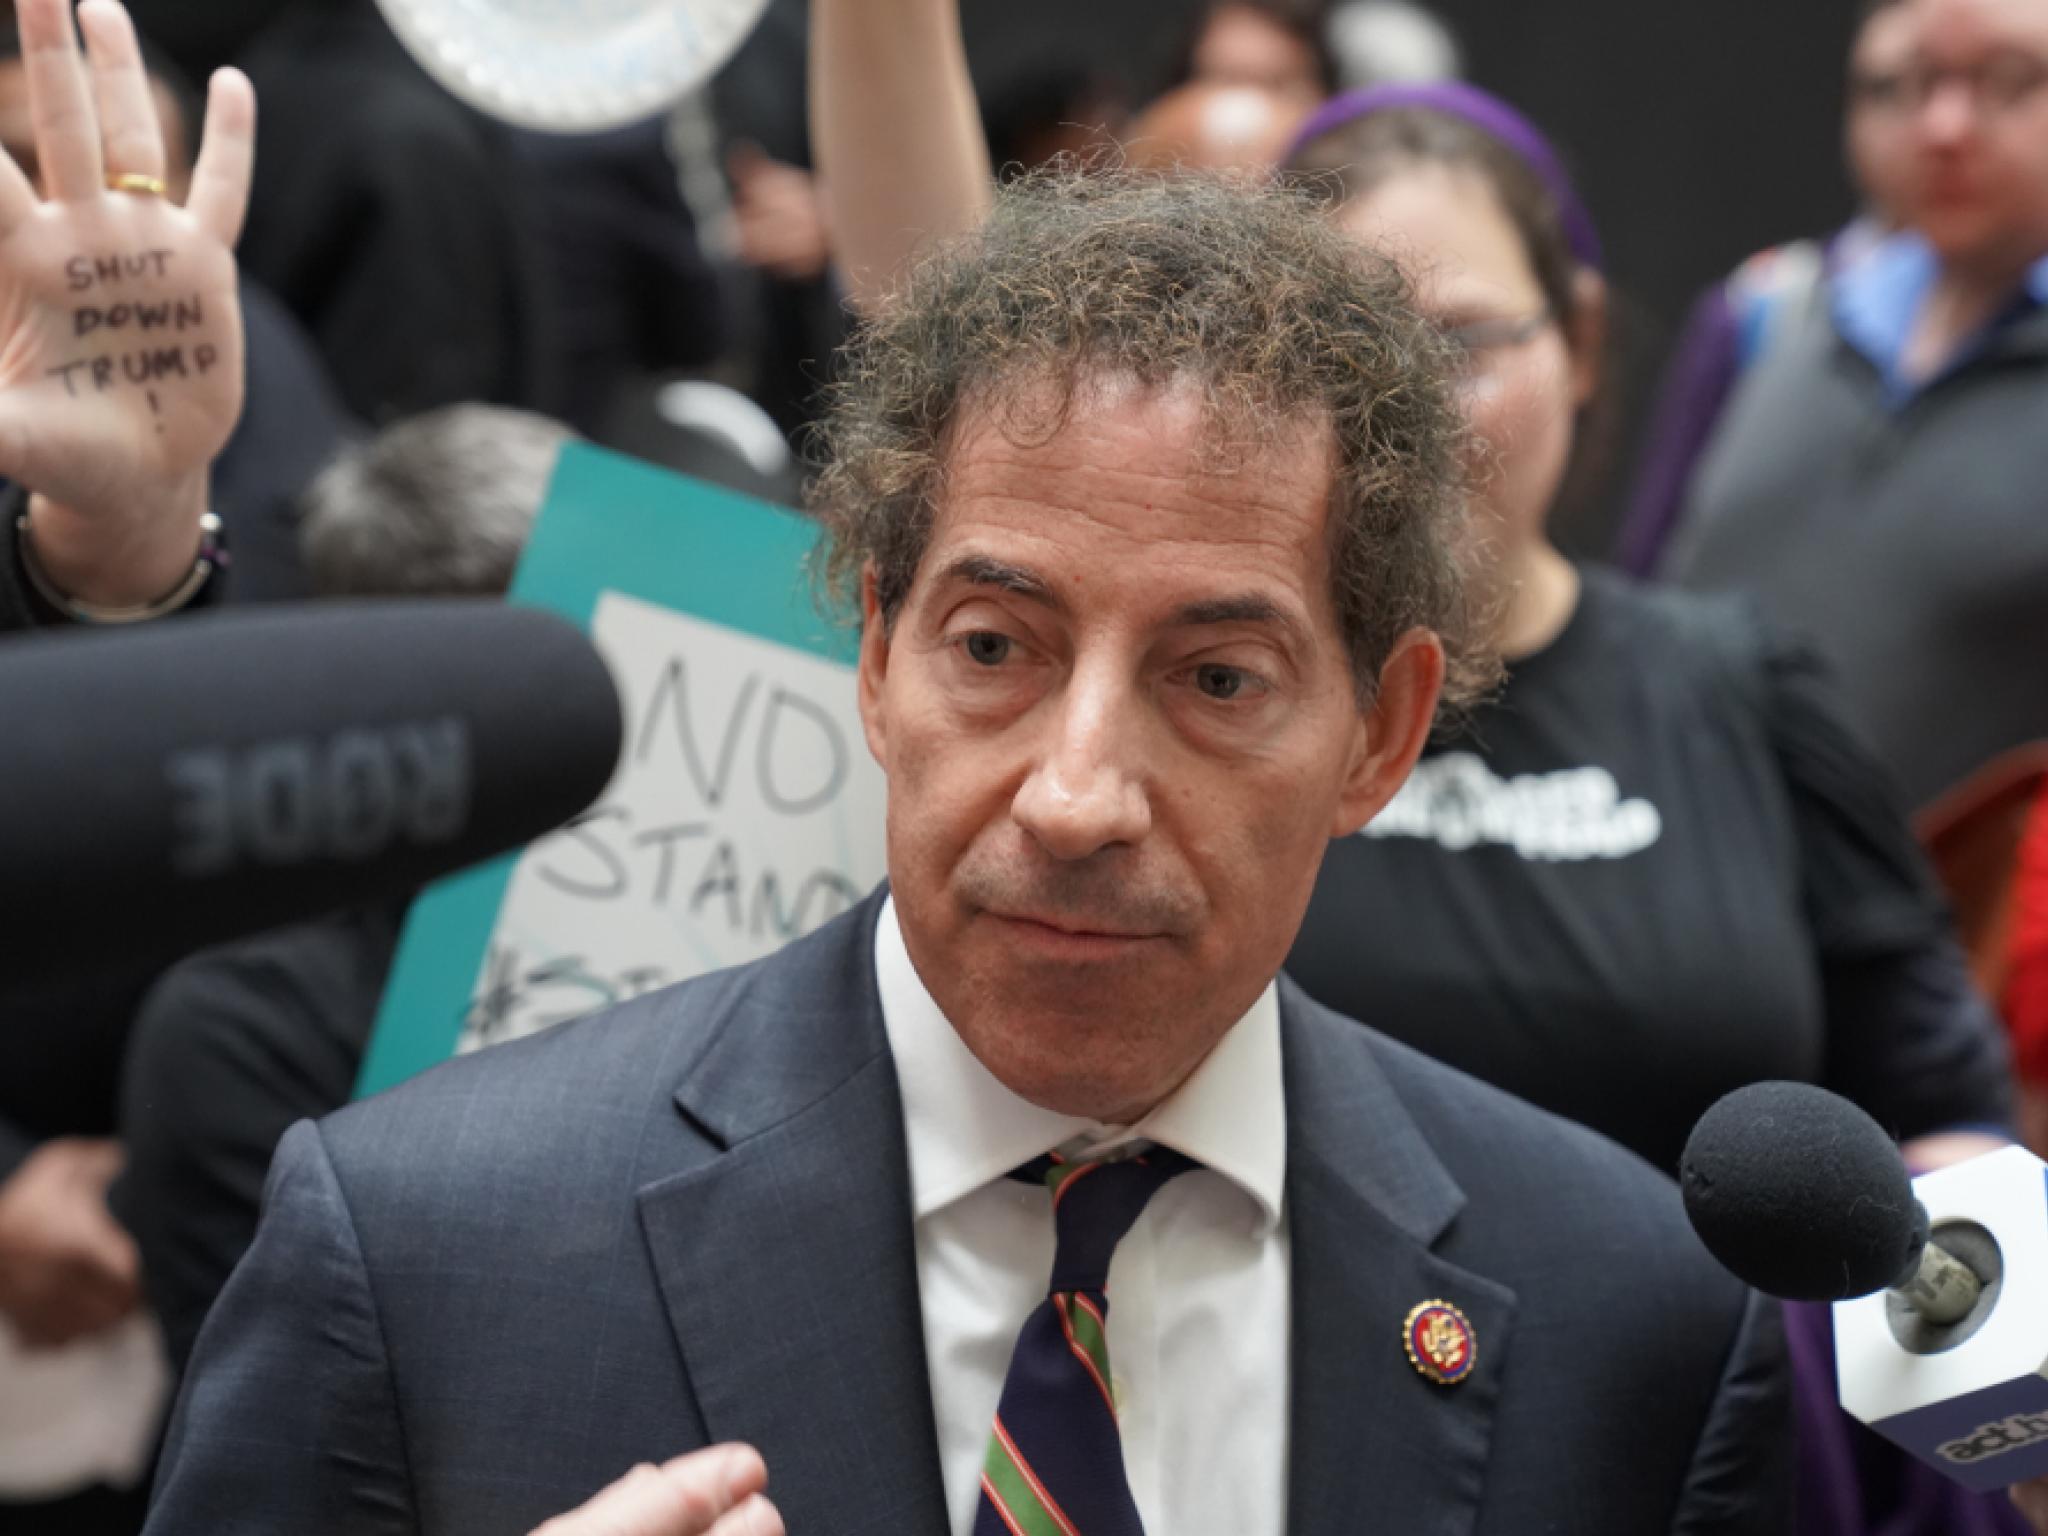  jamie-raskin-says-government-shutdown-may-spell-trouble-for-matt-gaetz-marjorie-taylor-going-to-end-their-political-careers 